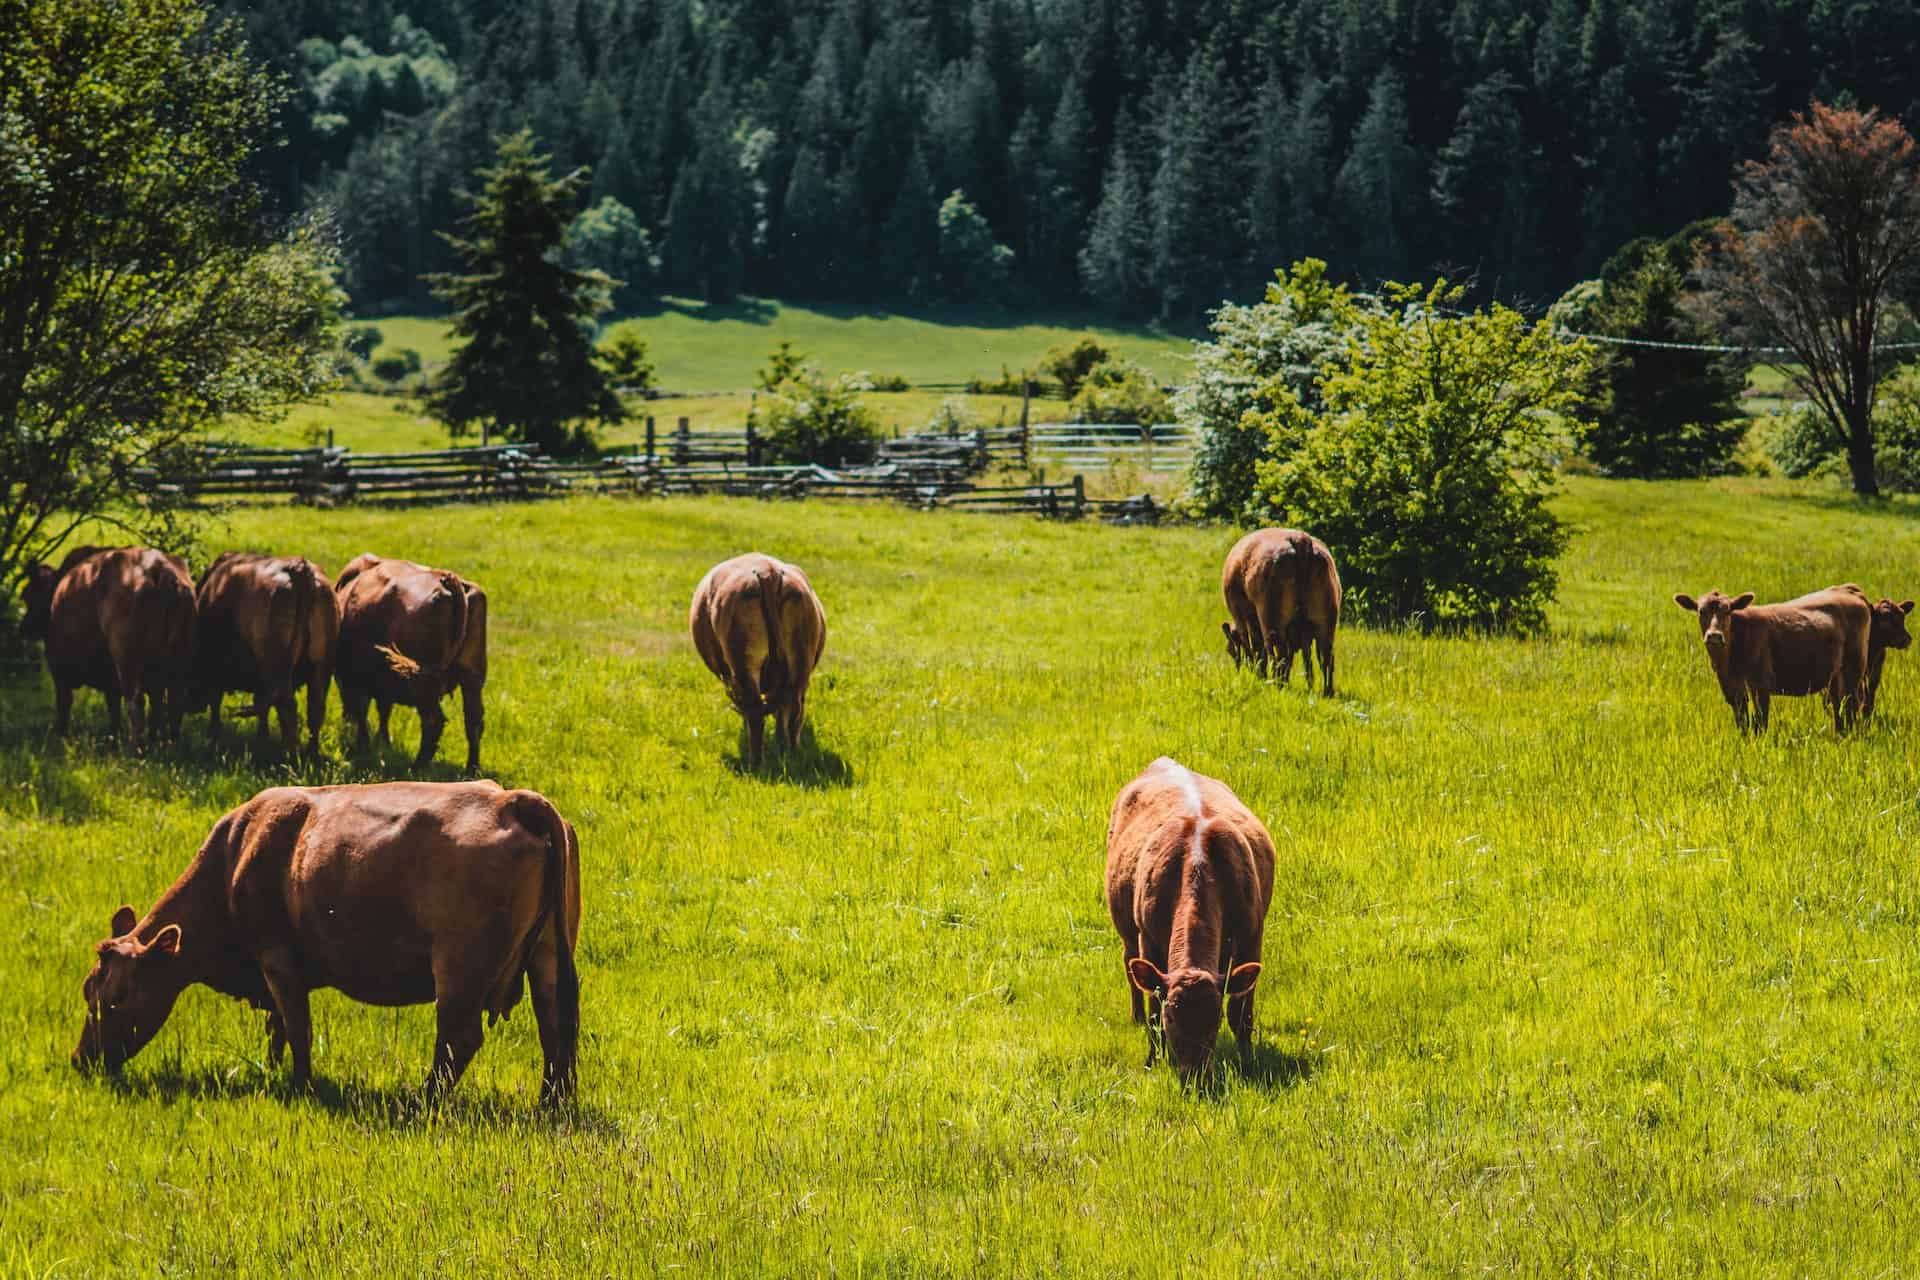 Herd of cows on a grass field